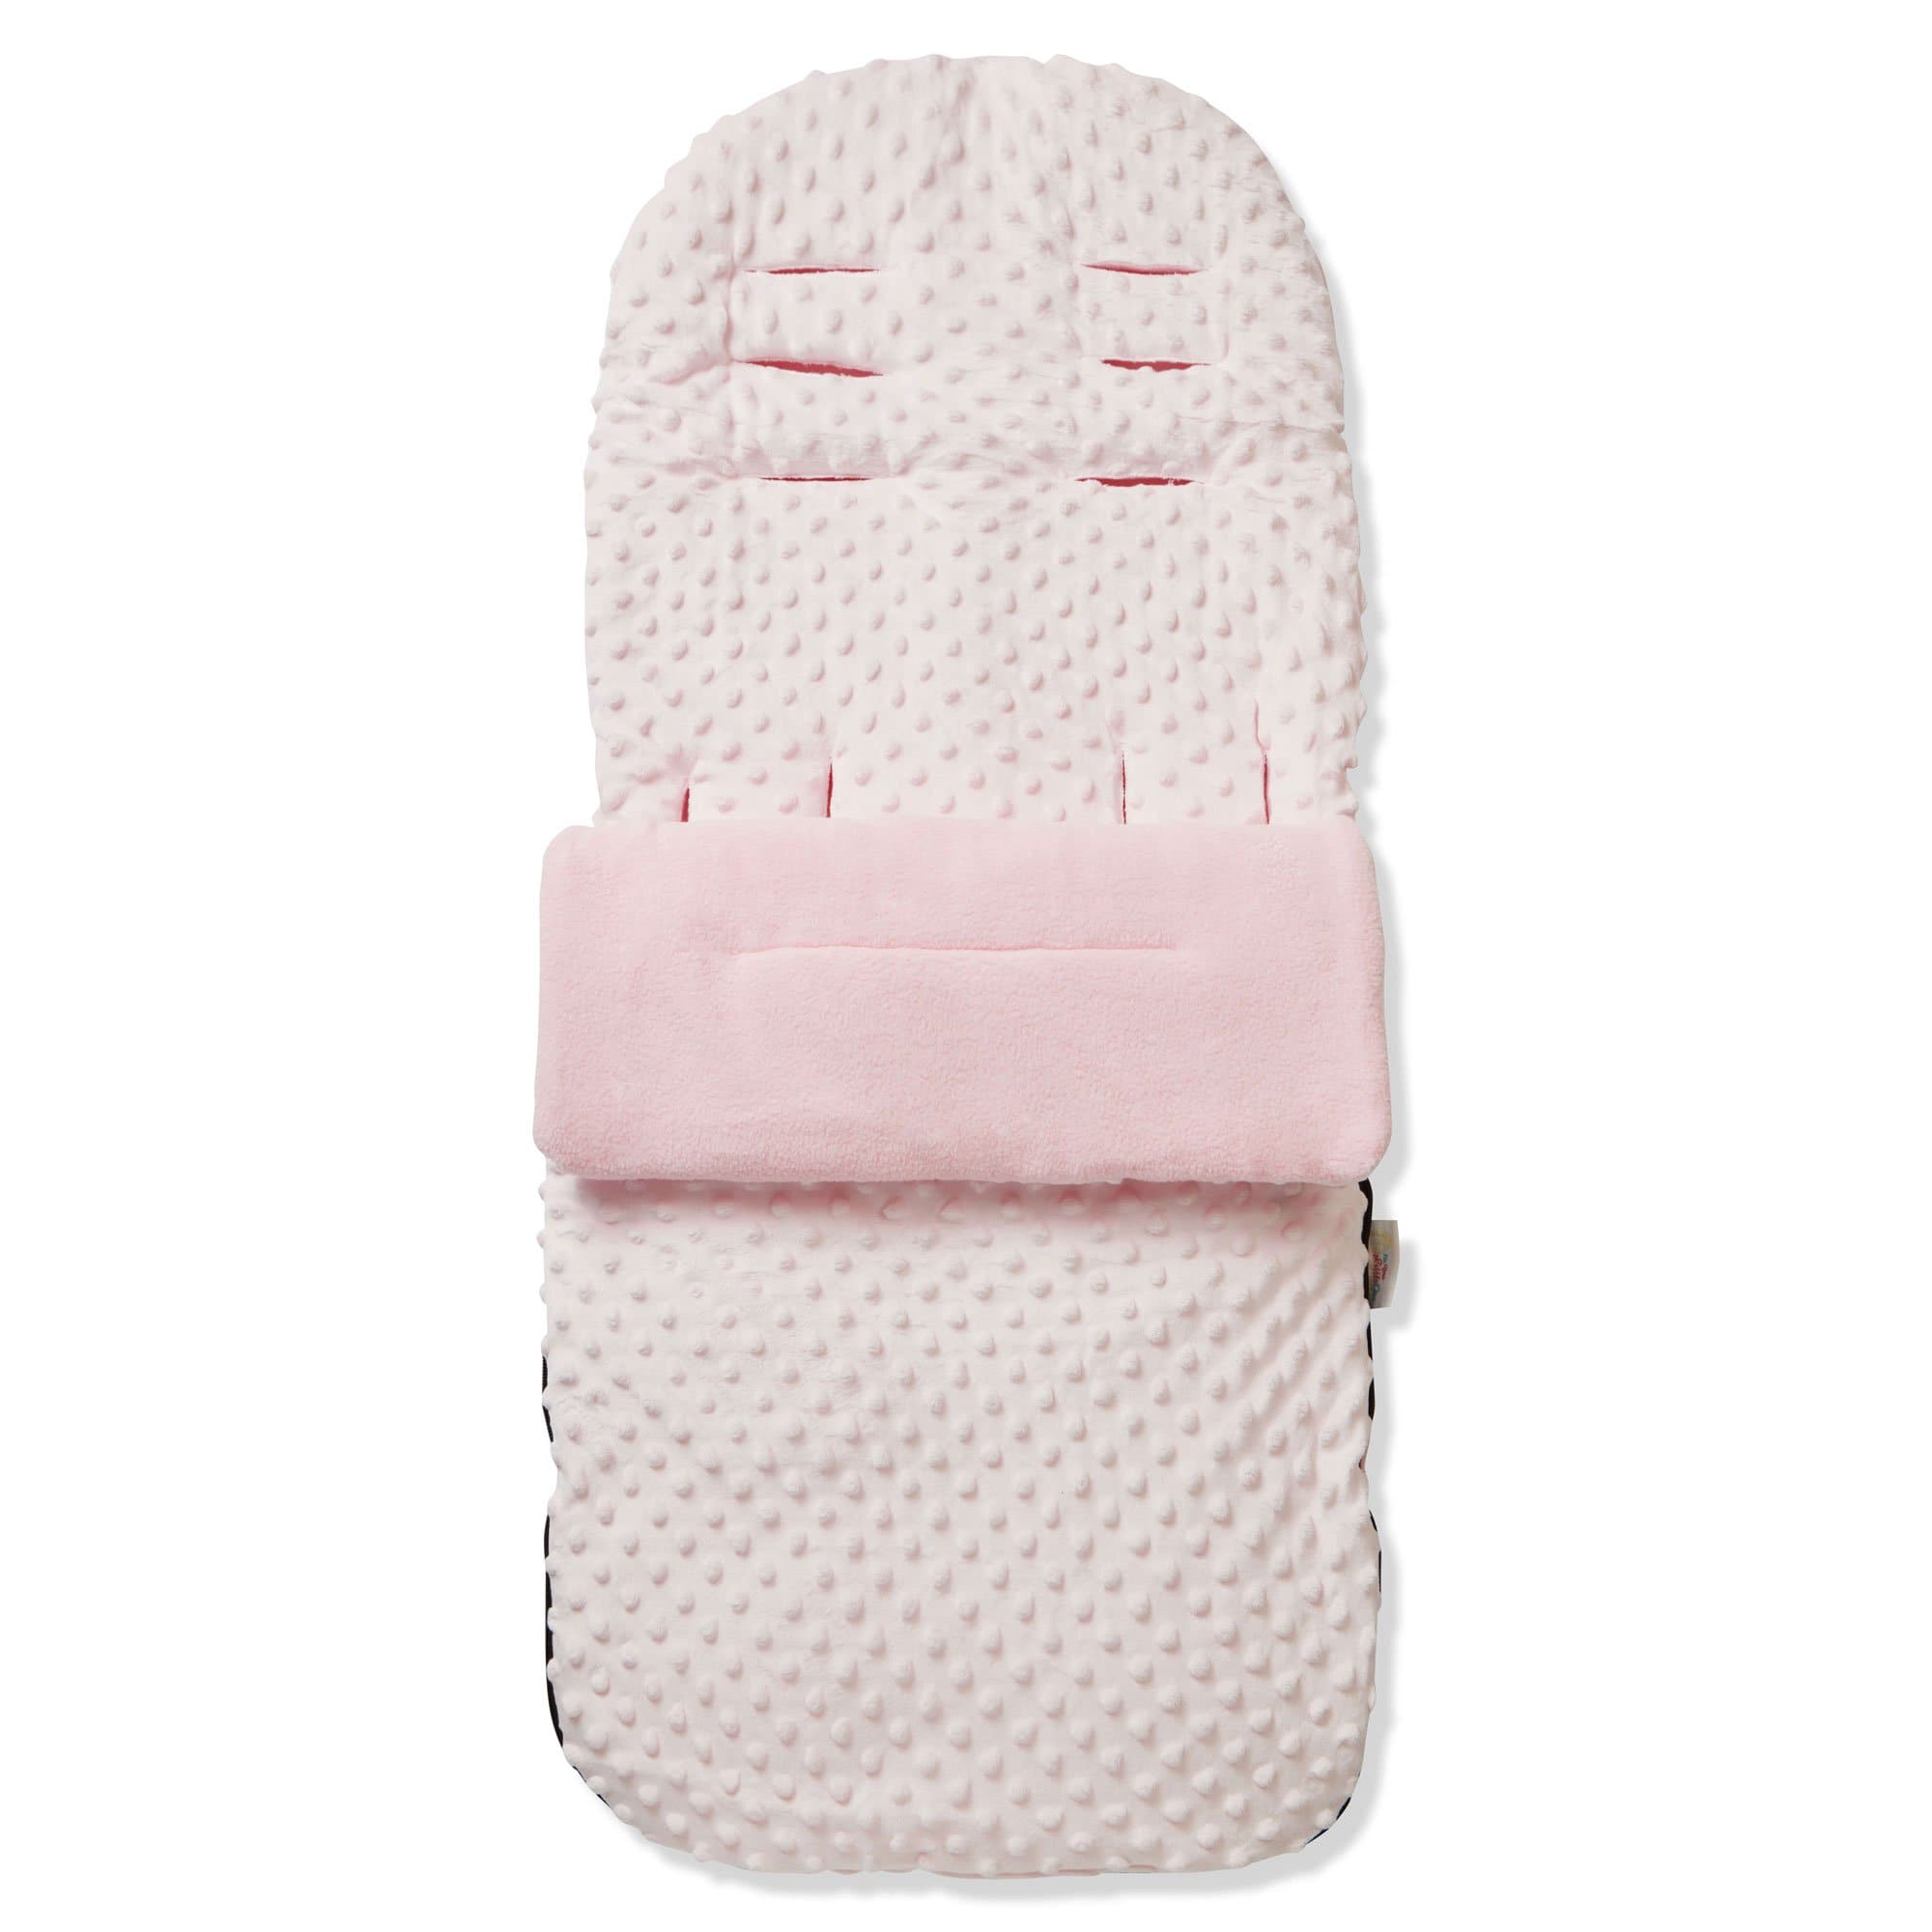 Dimple Footmuff / Cosy Toes Compatible with Baby Trend - For Your Little One